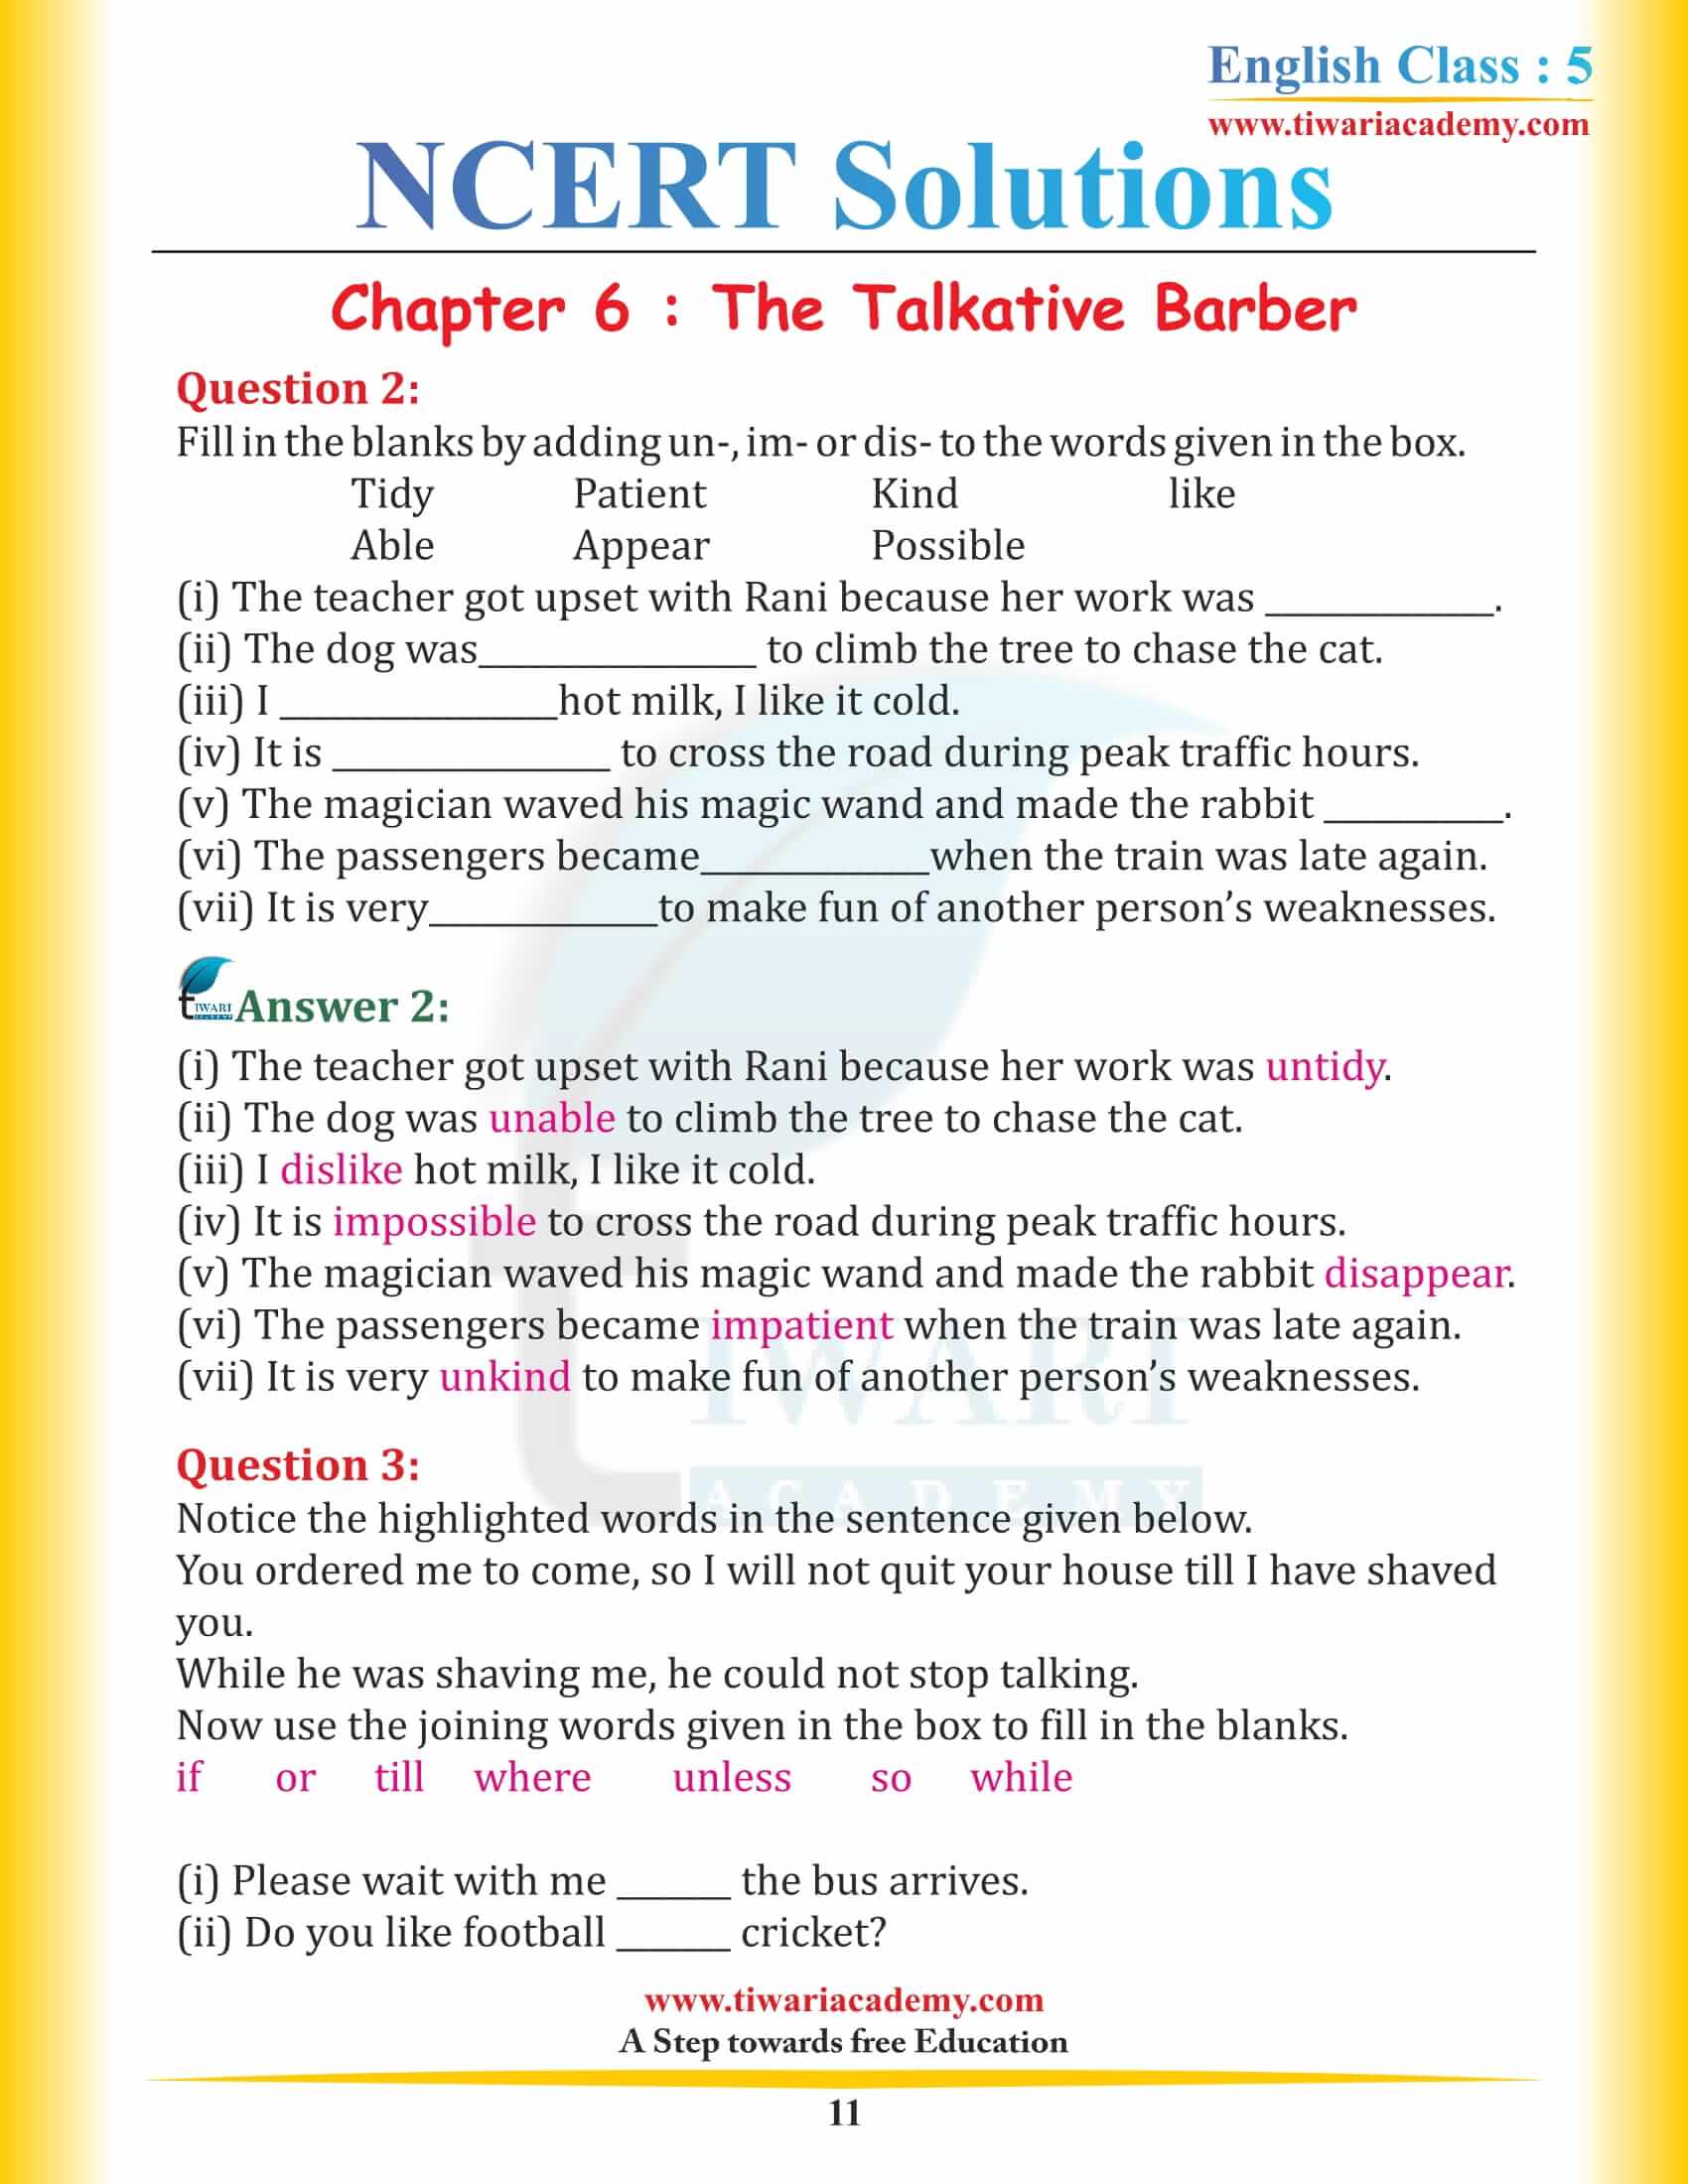 NCERT Solutions for Class 5 English Chapter 6 The Talkative Barber download